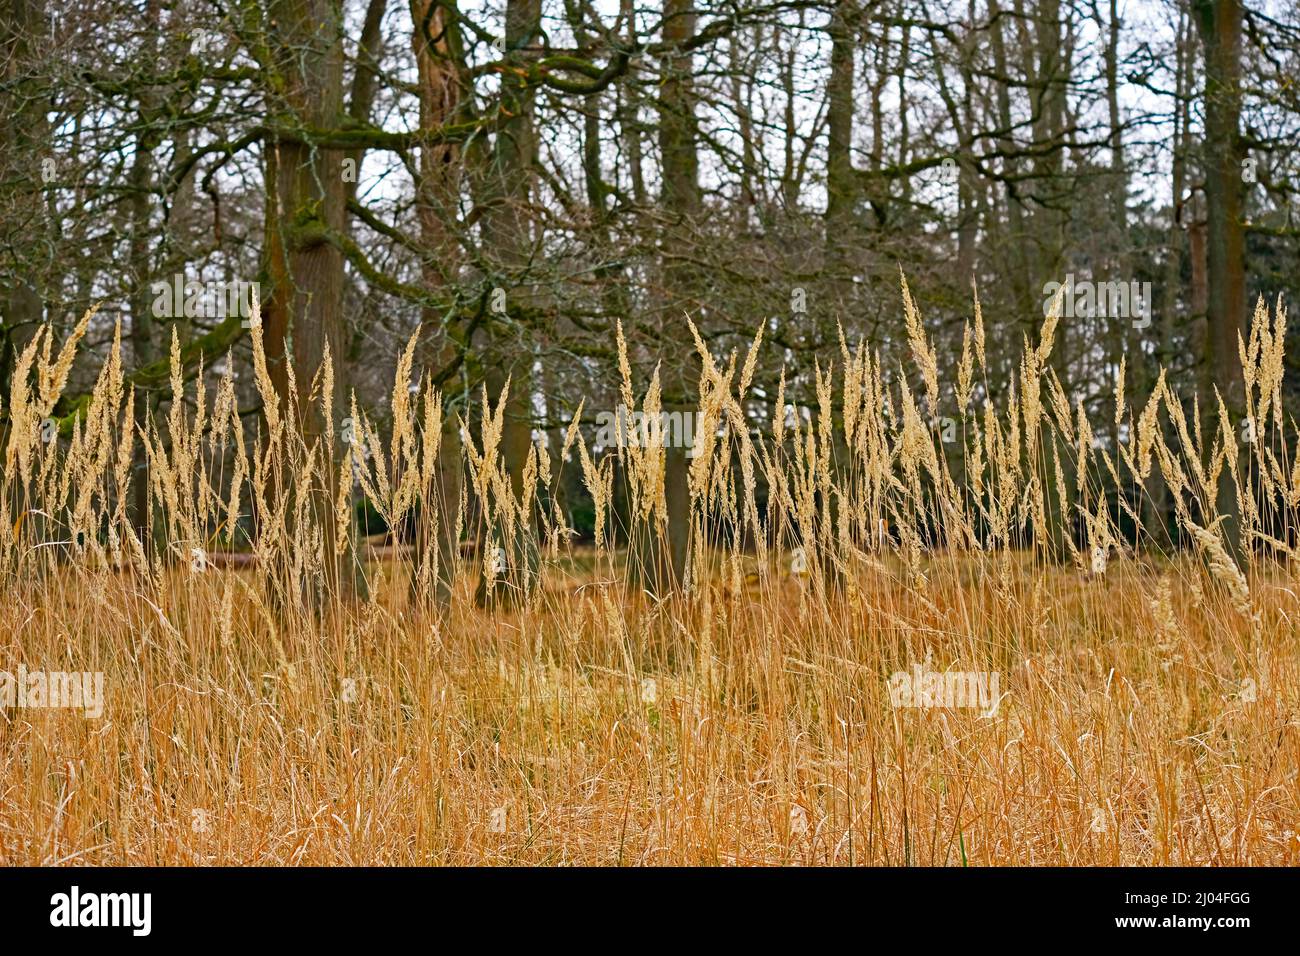 Through the looking grass! View into woodland. Woburn, England Stock Photo